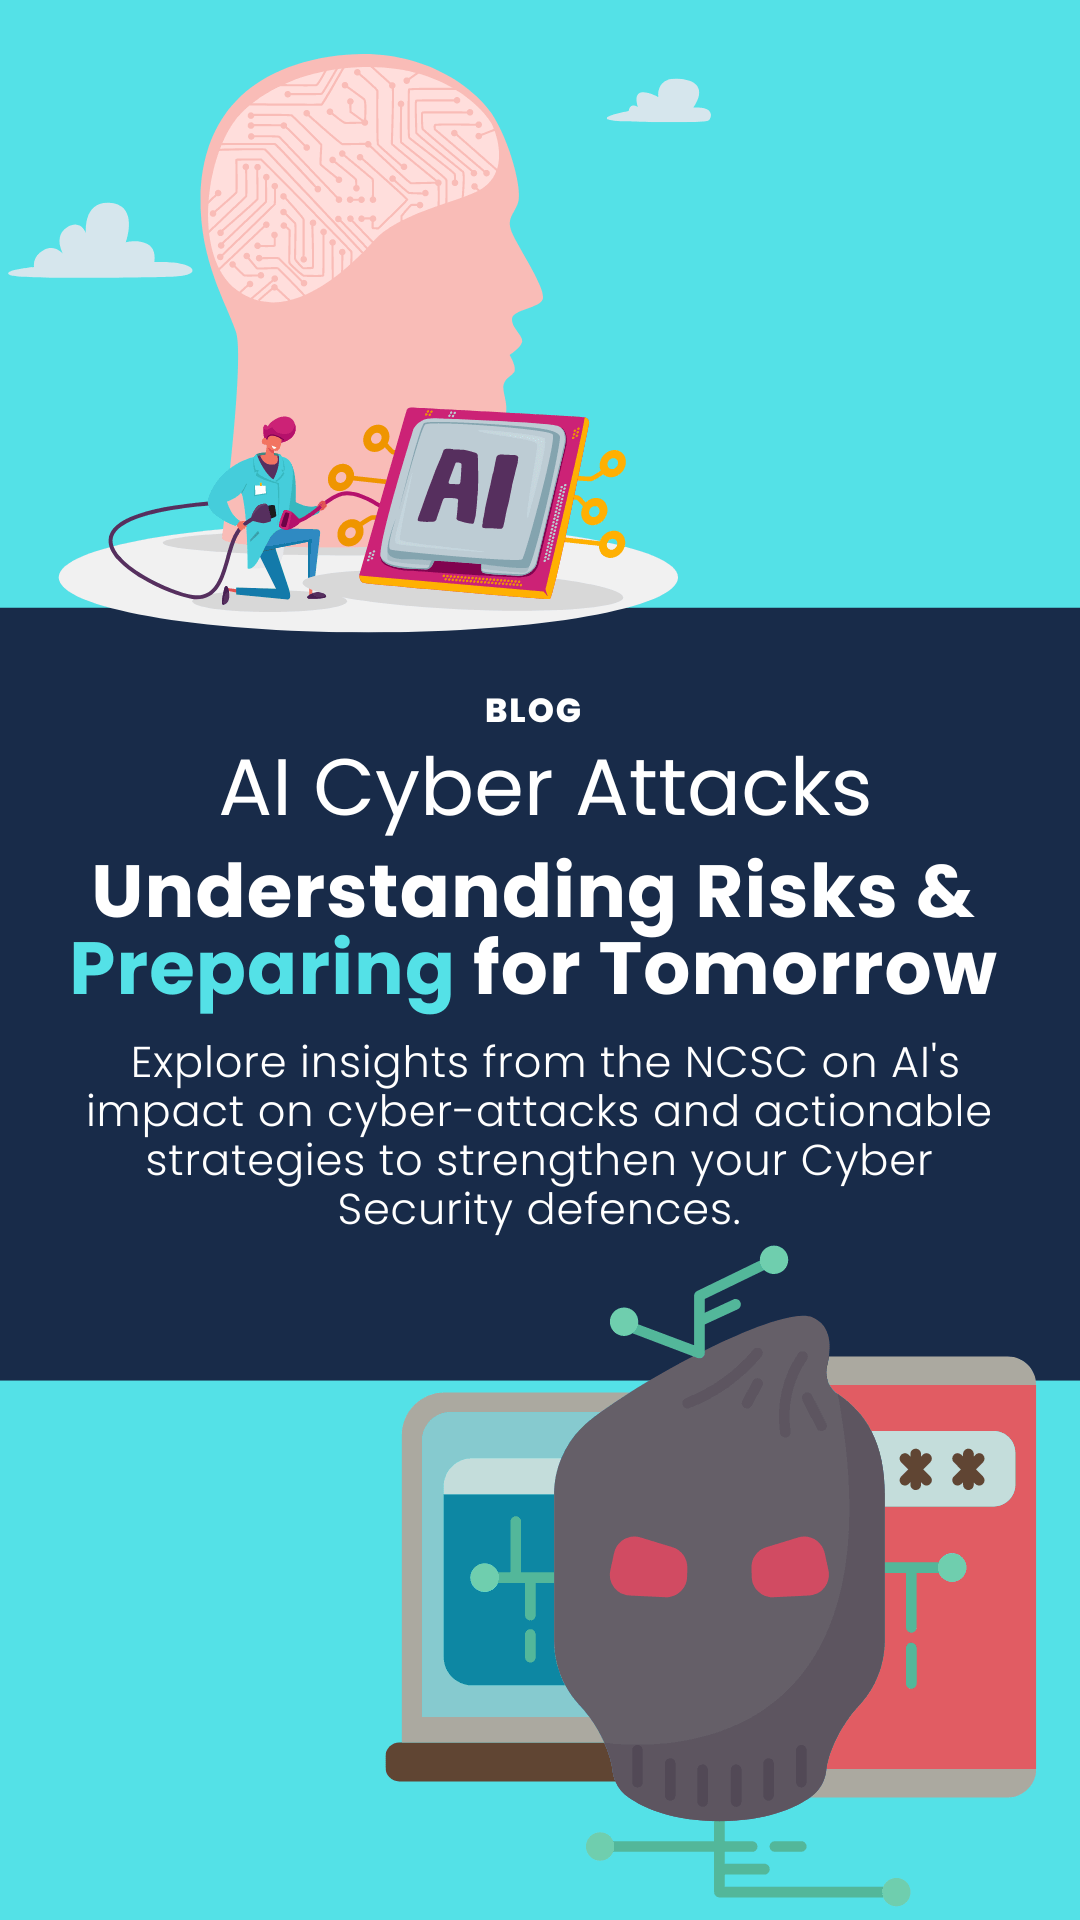 Blog image with the title of the blog and summary of staying safe from ai attacks.